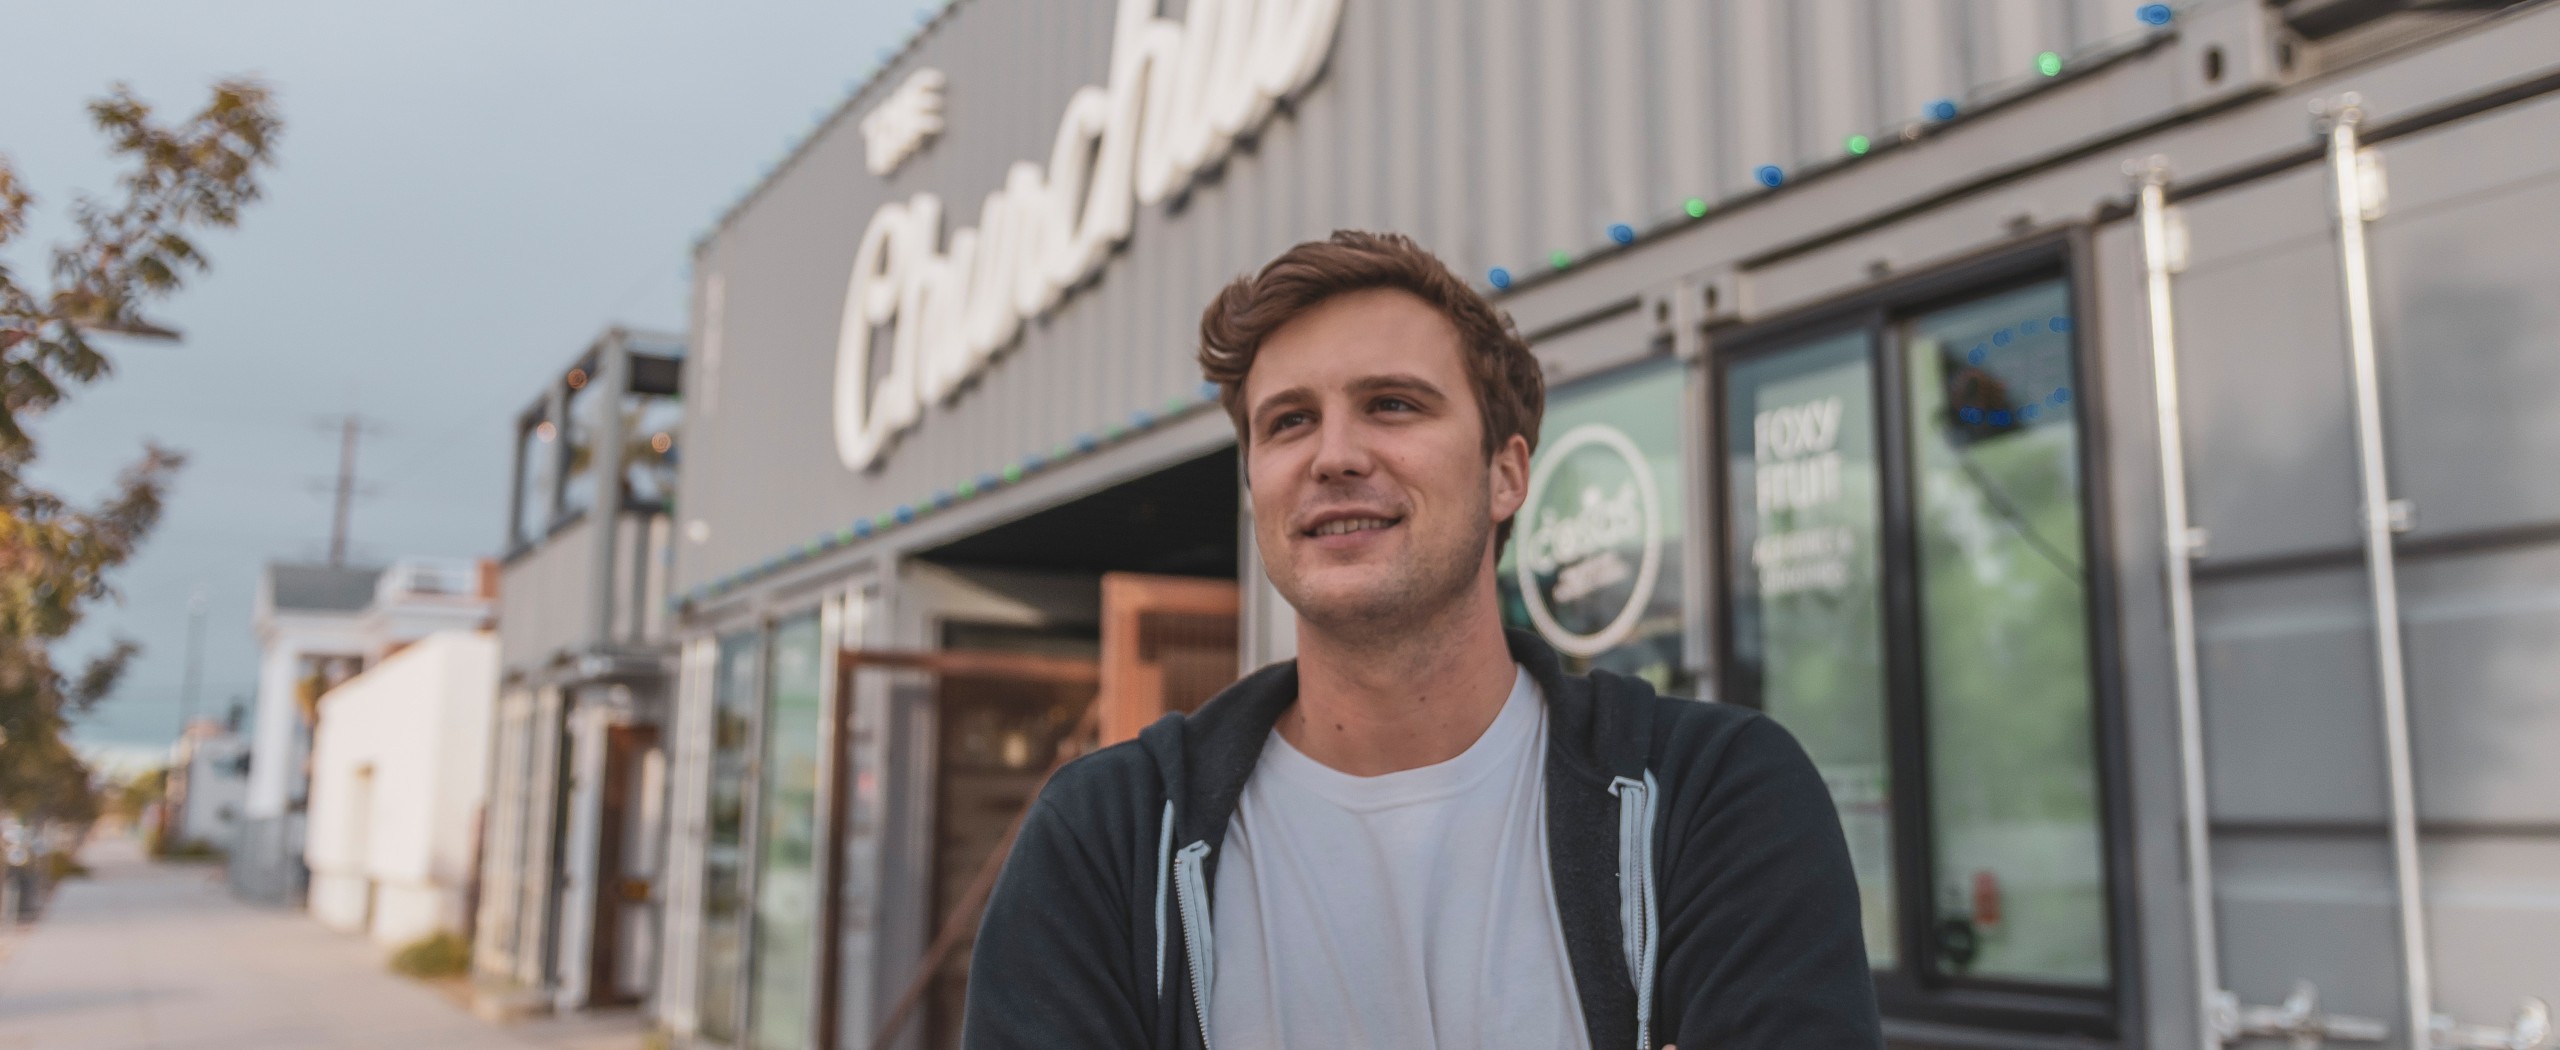 Kell Duncan ‘11 is the co-owner of the Churchill, an Arizona-based collective of small businesses that has become a hip destination since it opened in September 2018.